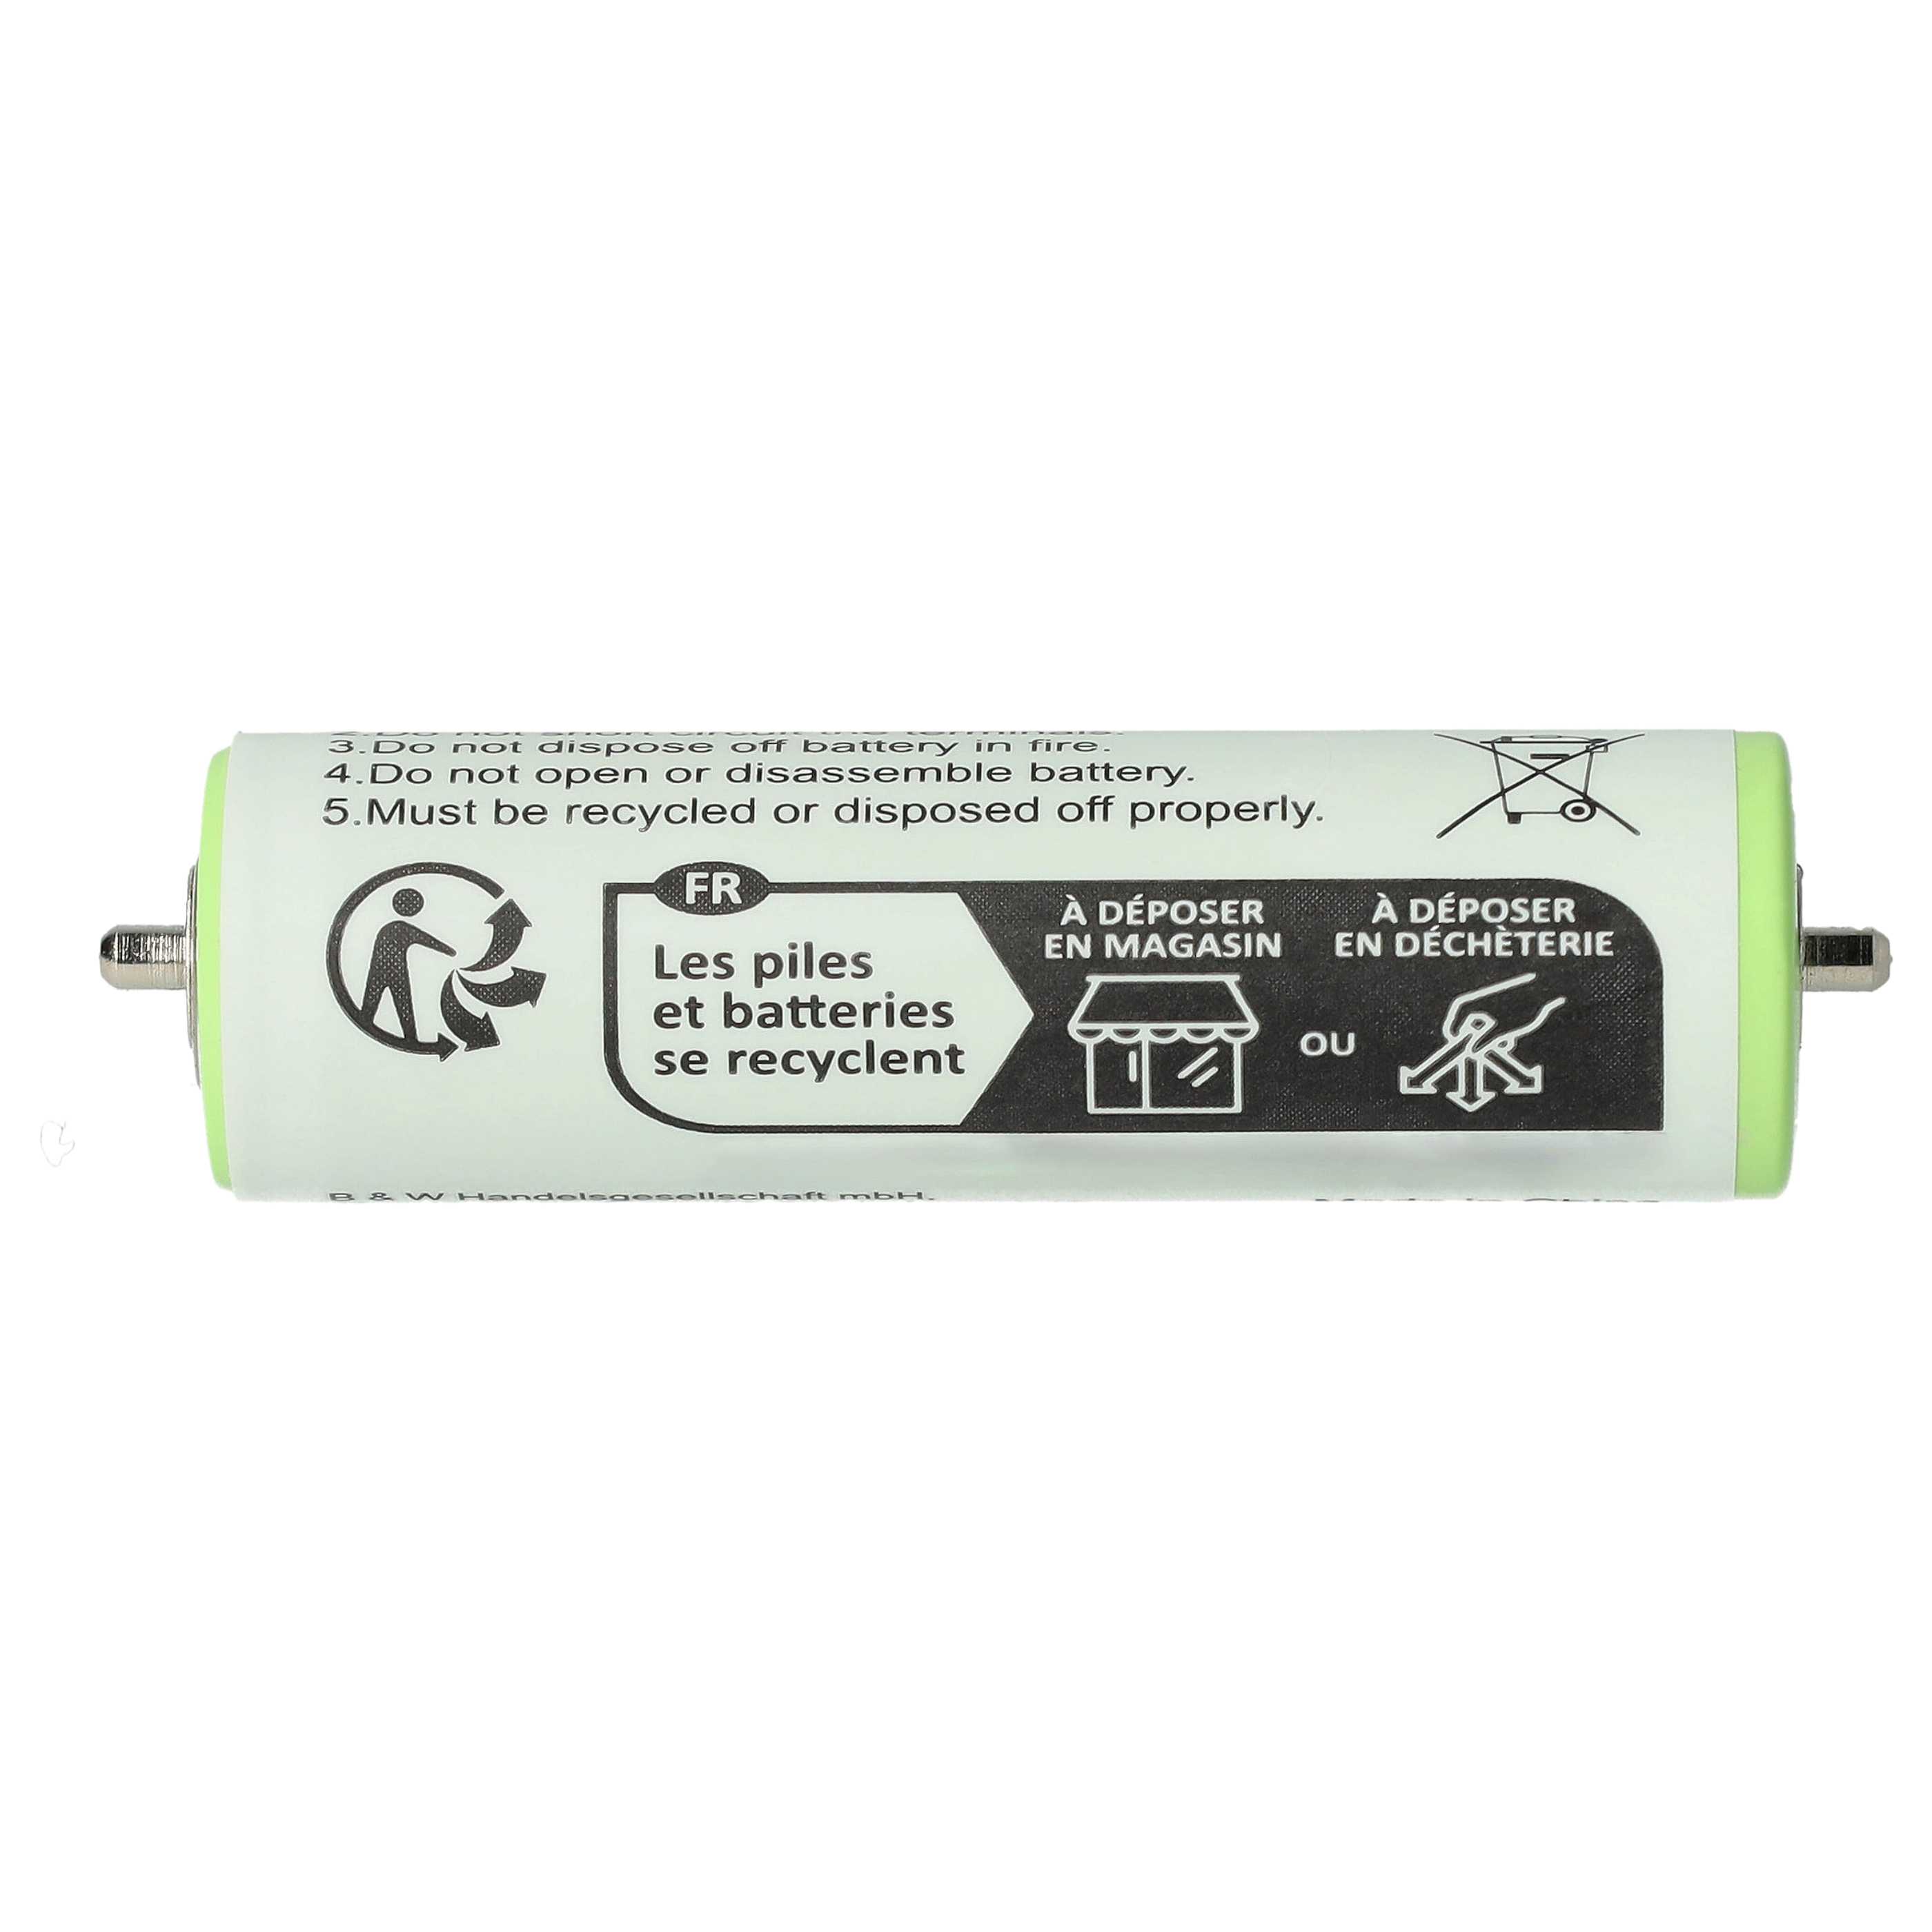 Electric Razor Battery Replacement for Braun 67030923, 1HR-AAAUV, 67030834, 67030165 - 1800mAh 1.2V NiMH